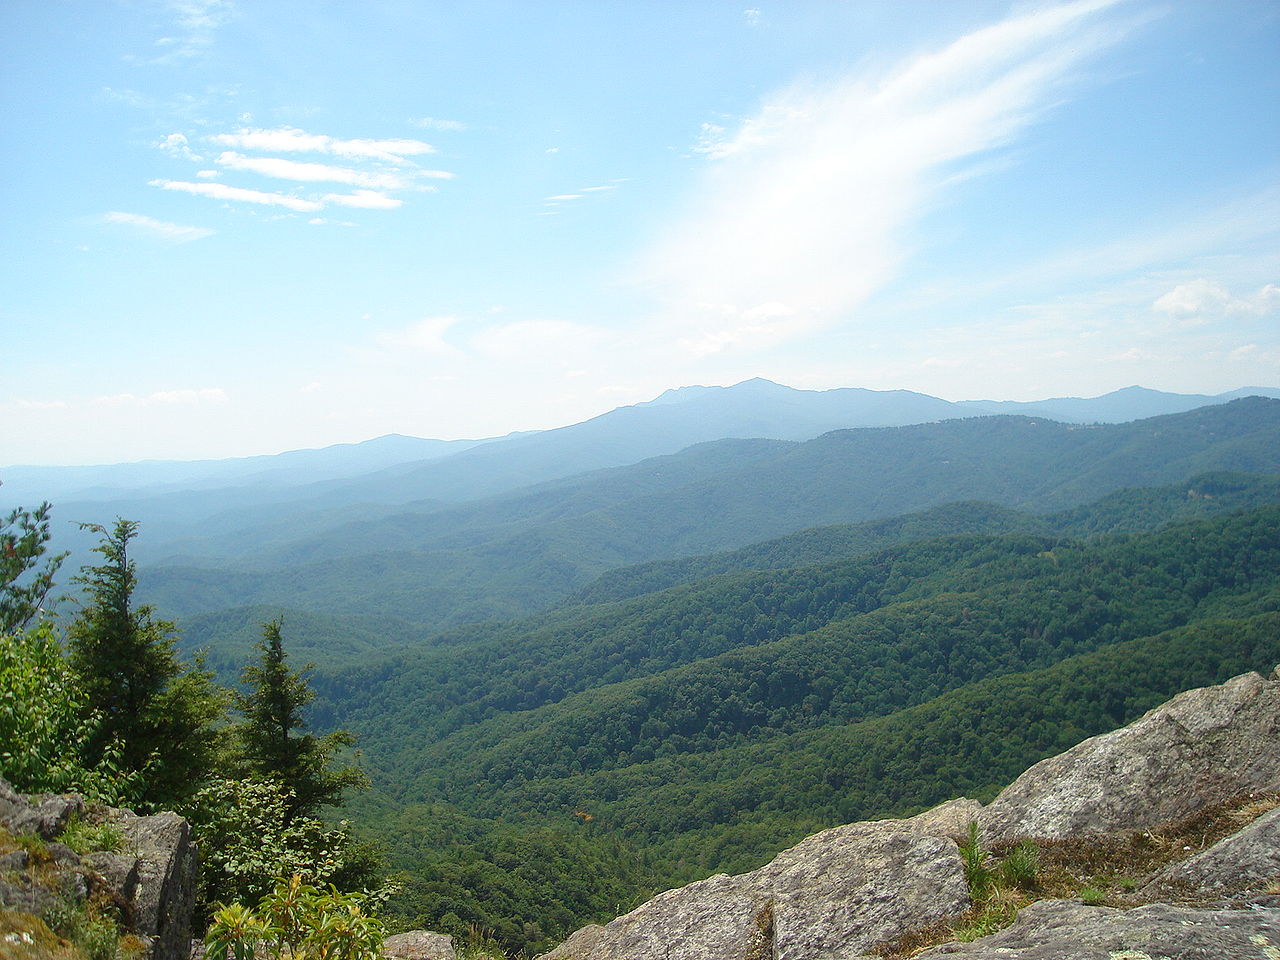 Fun facts about the Blue Ridge Mountains